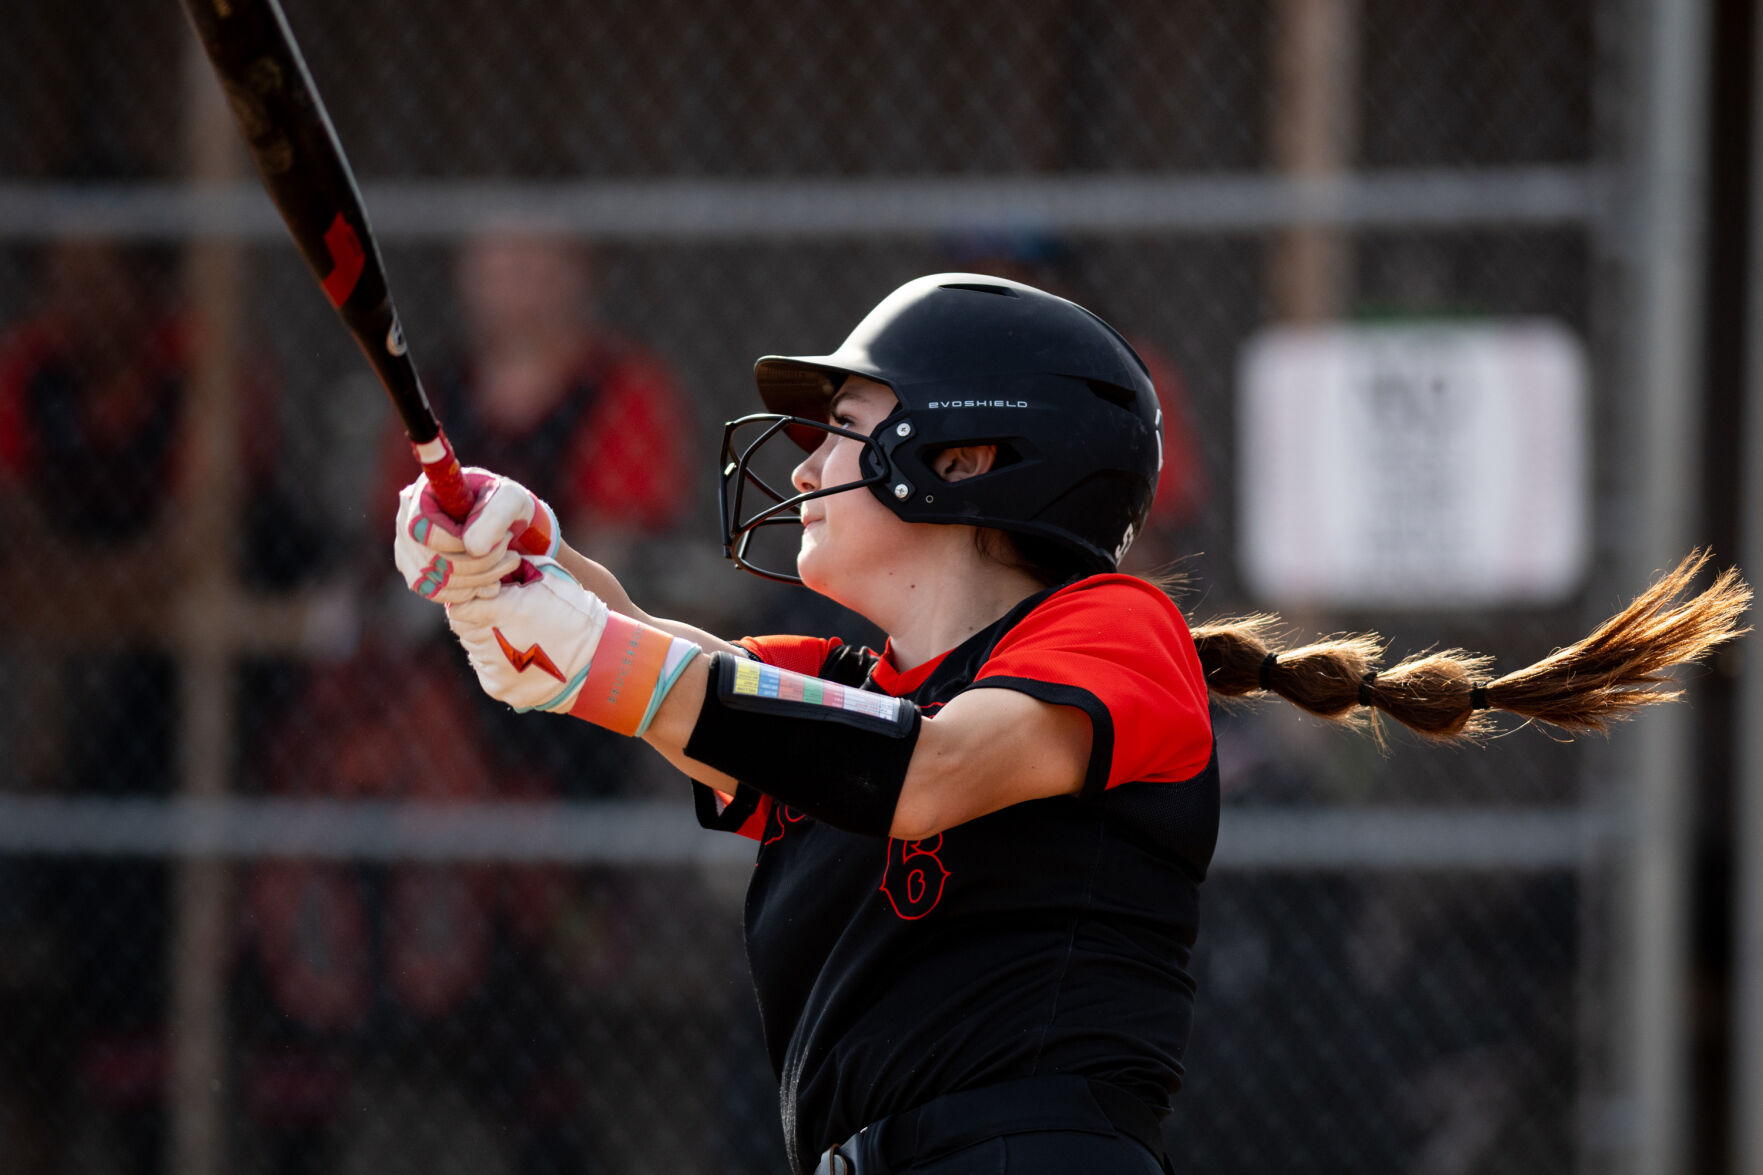 Roundup: Tigers remain unbeaten at 14-0 with 8-inning win at West Middlesex